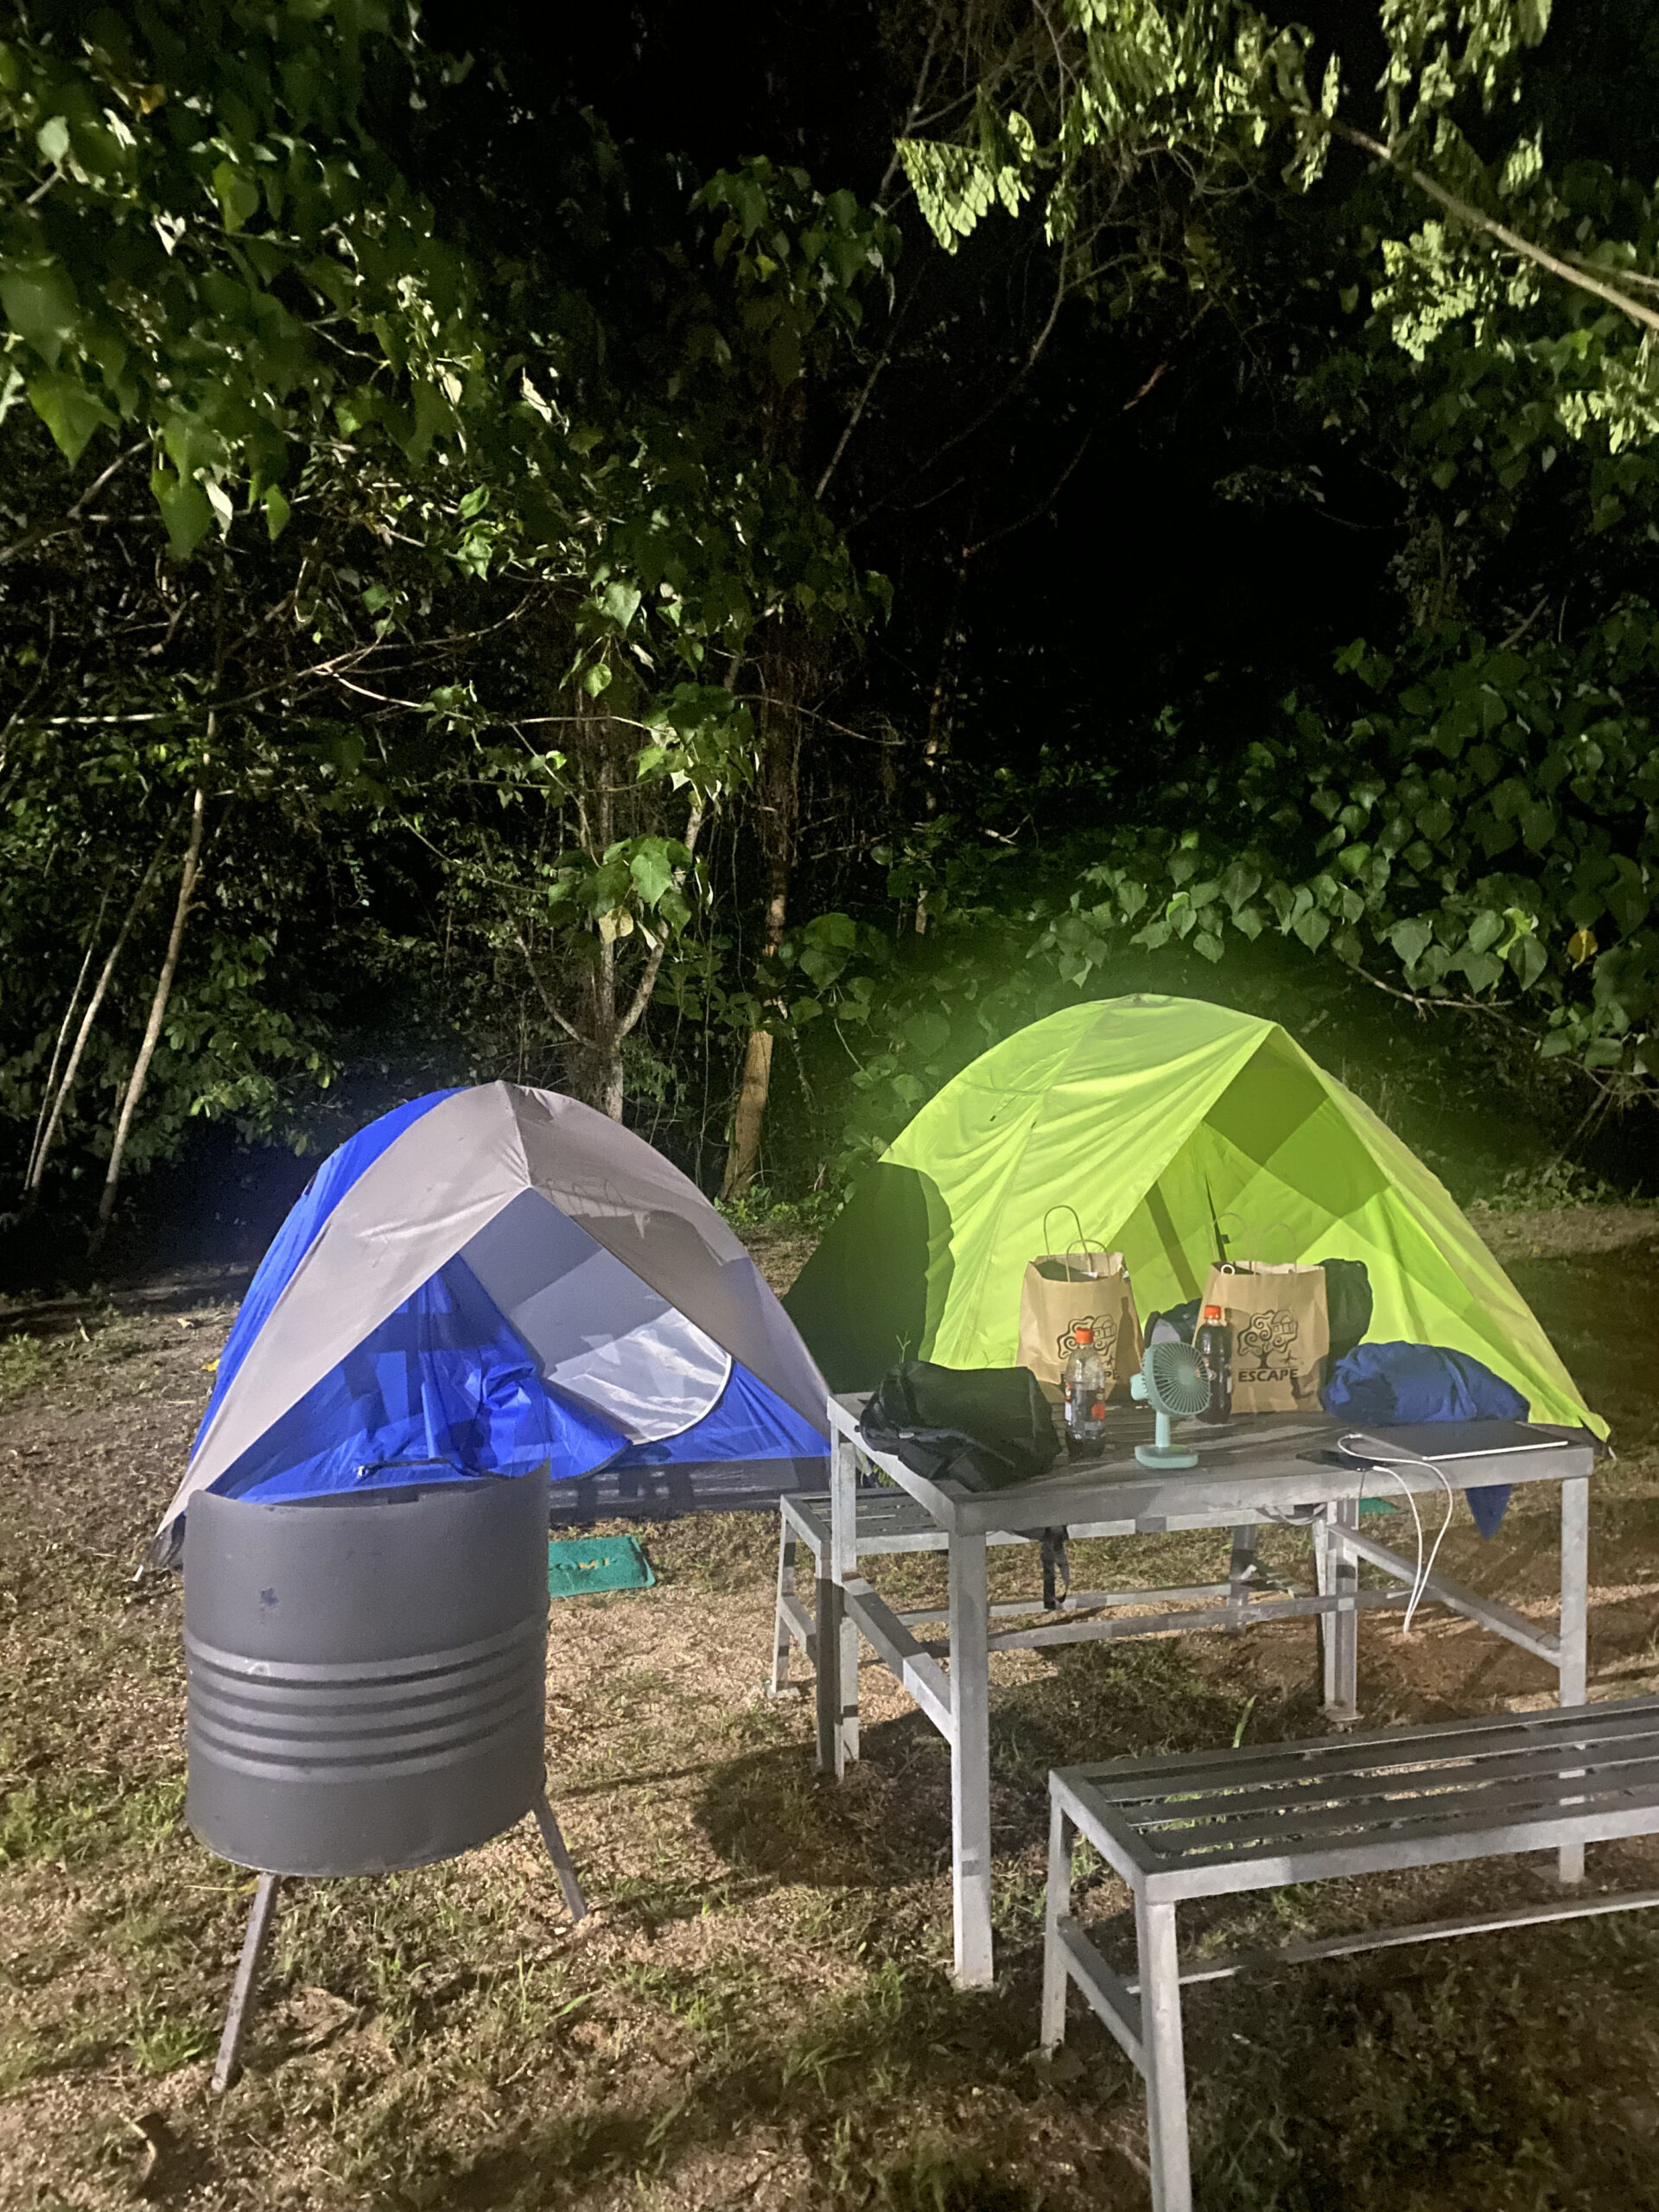 Camping during nigh time at escape penang